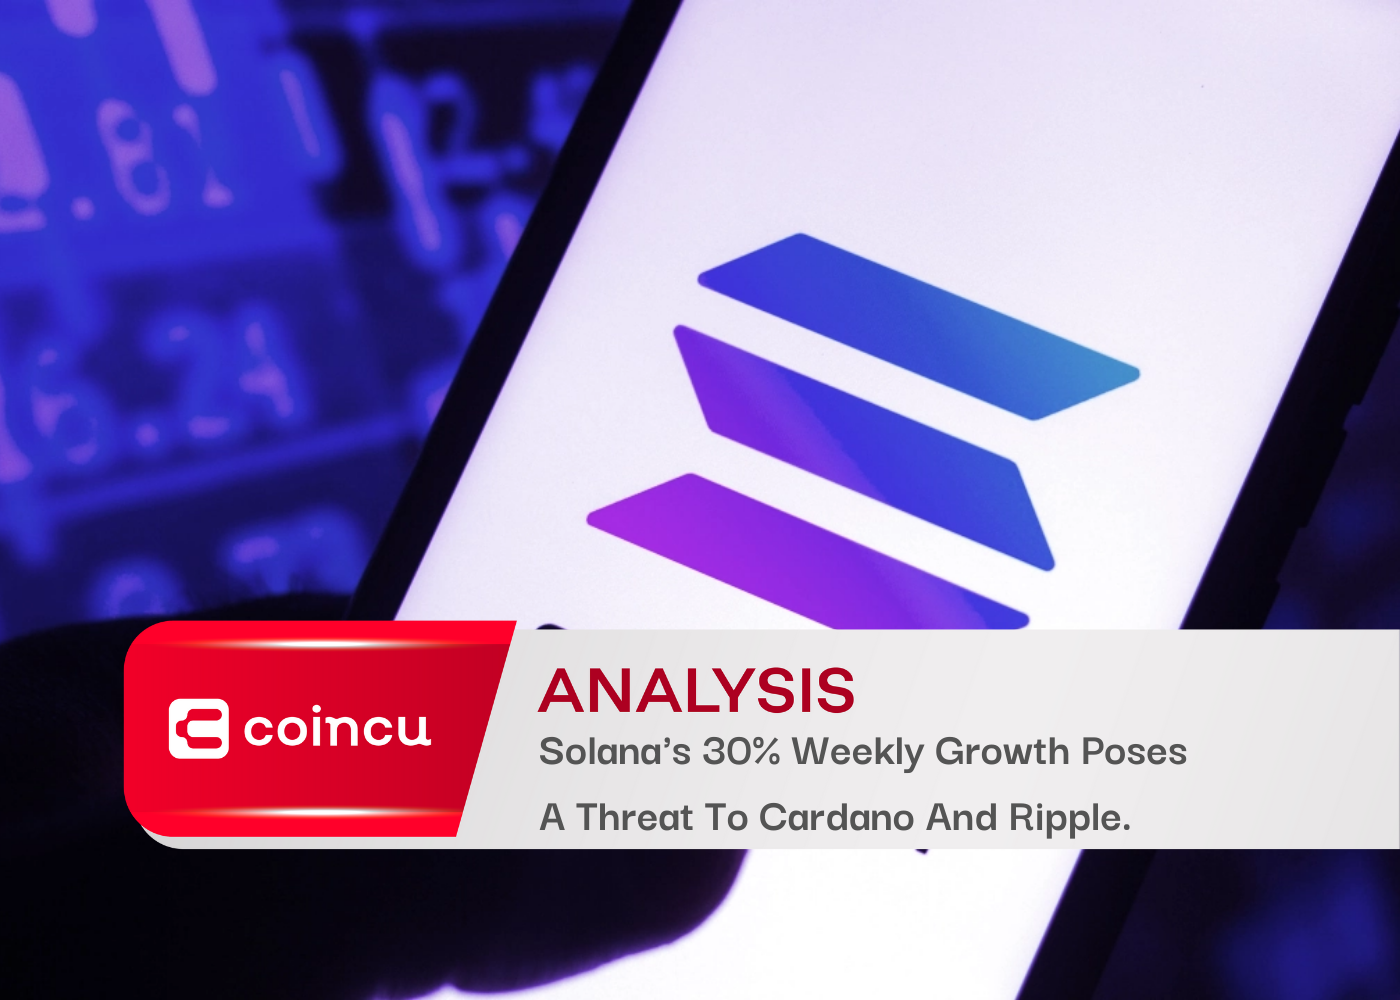 Solana's 30% Weekly Growth Poses A Threat To Cardano And Ripple.